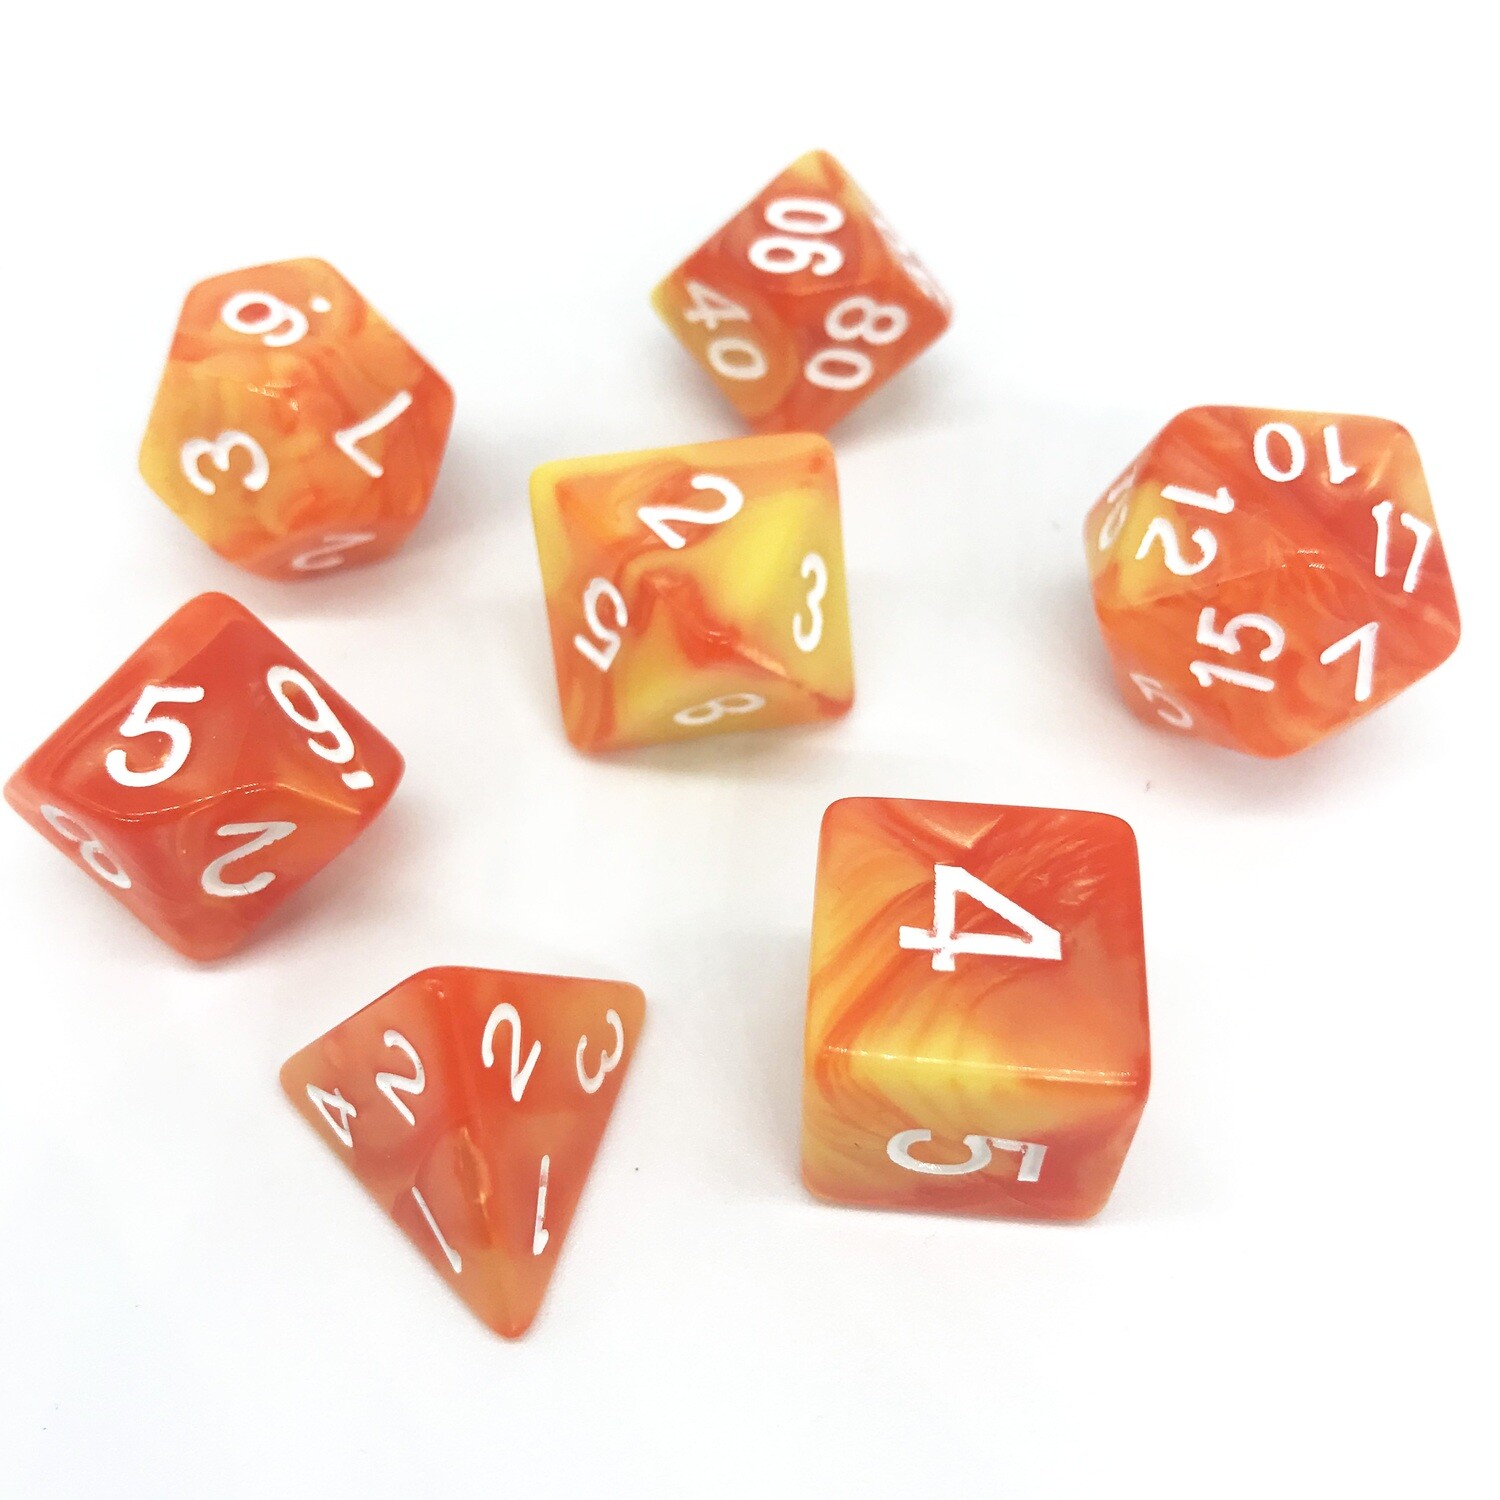 Dice Set - Orange and yellow marbled with white numbers